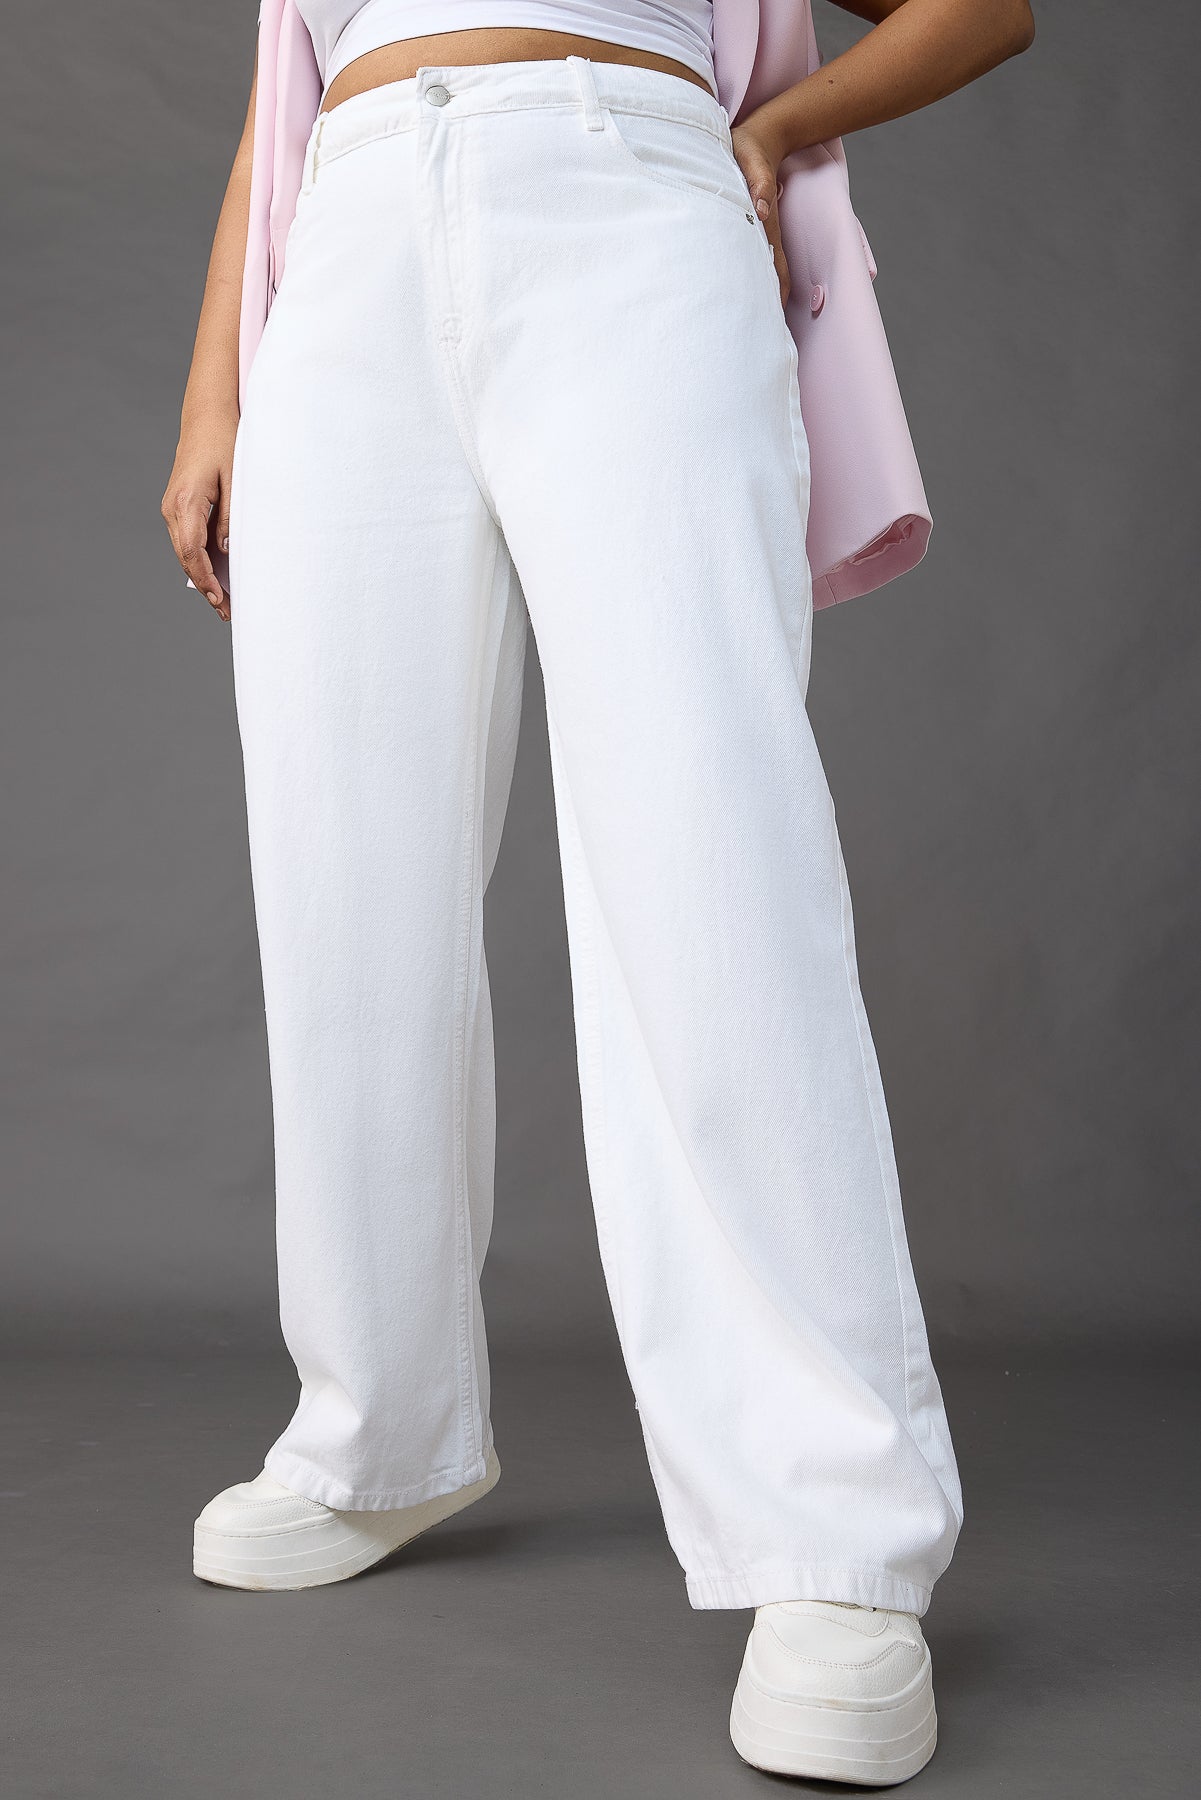 CURVE ICONIC WHITE WIDE LEG JEANS